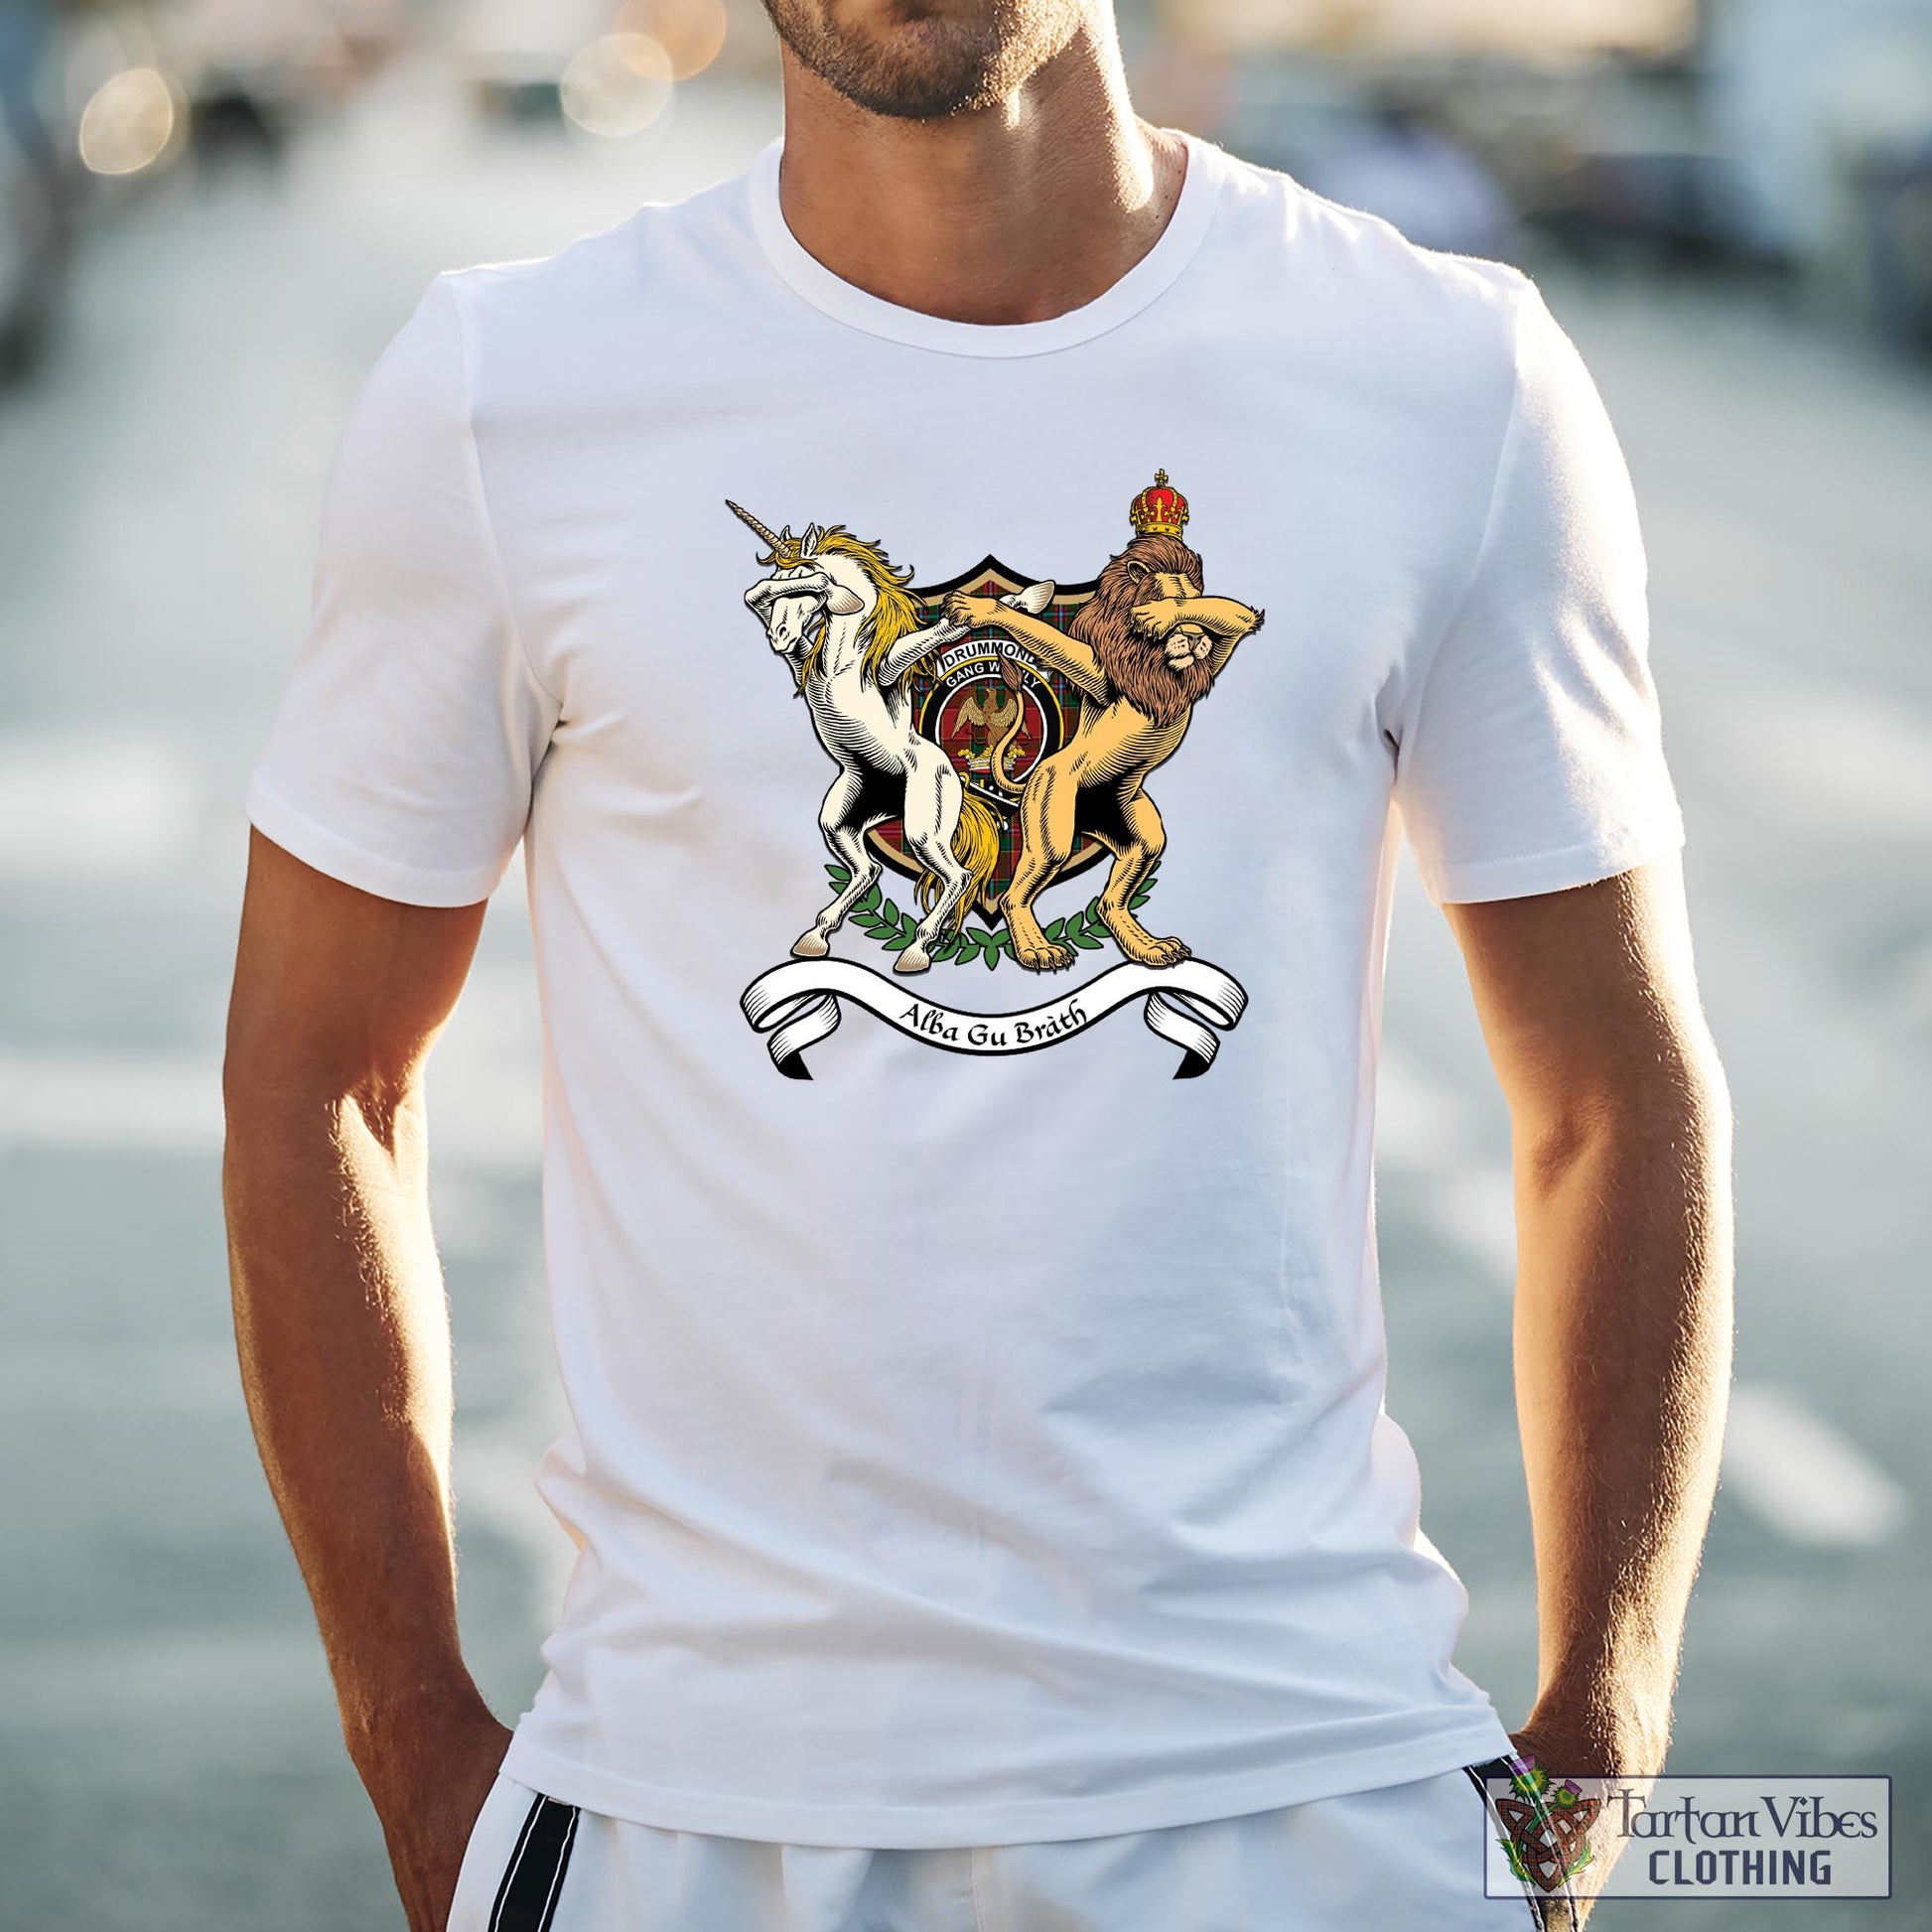 Tartan Vibes Clothing Drummond Ancient Family Crest Cotton Men's T-Shirt with Scotland Royal Coat Of Arm Funny Style